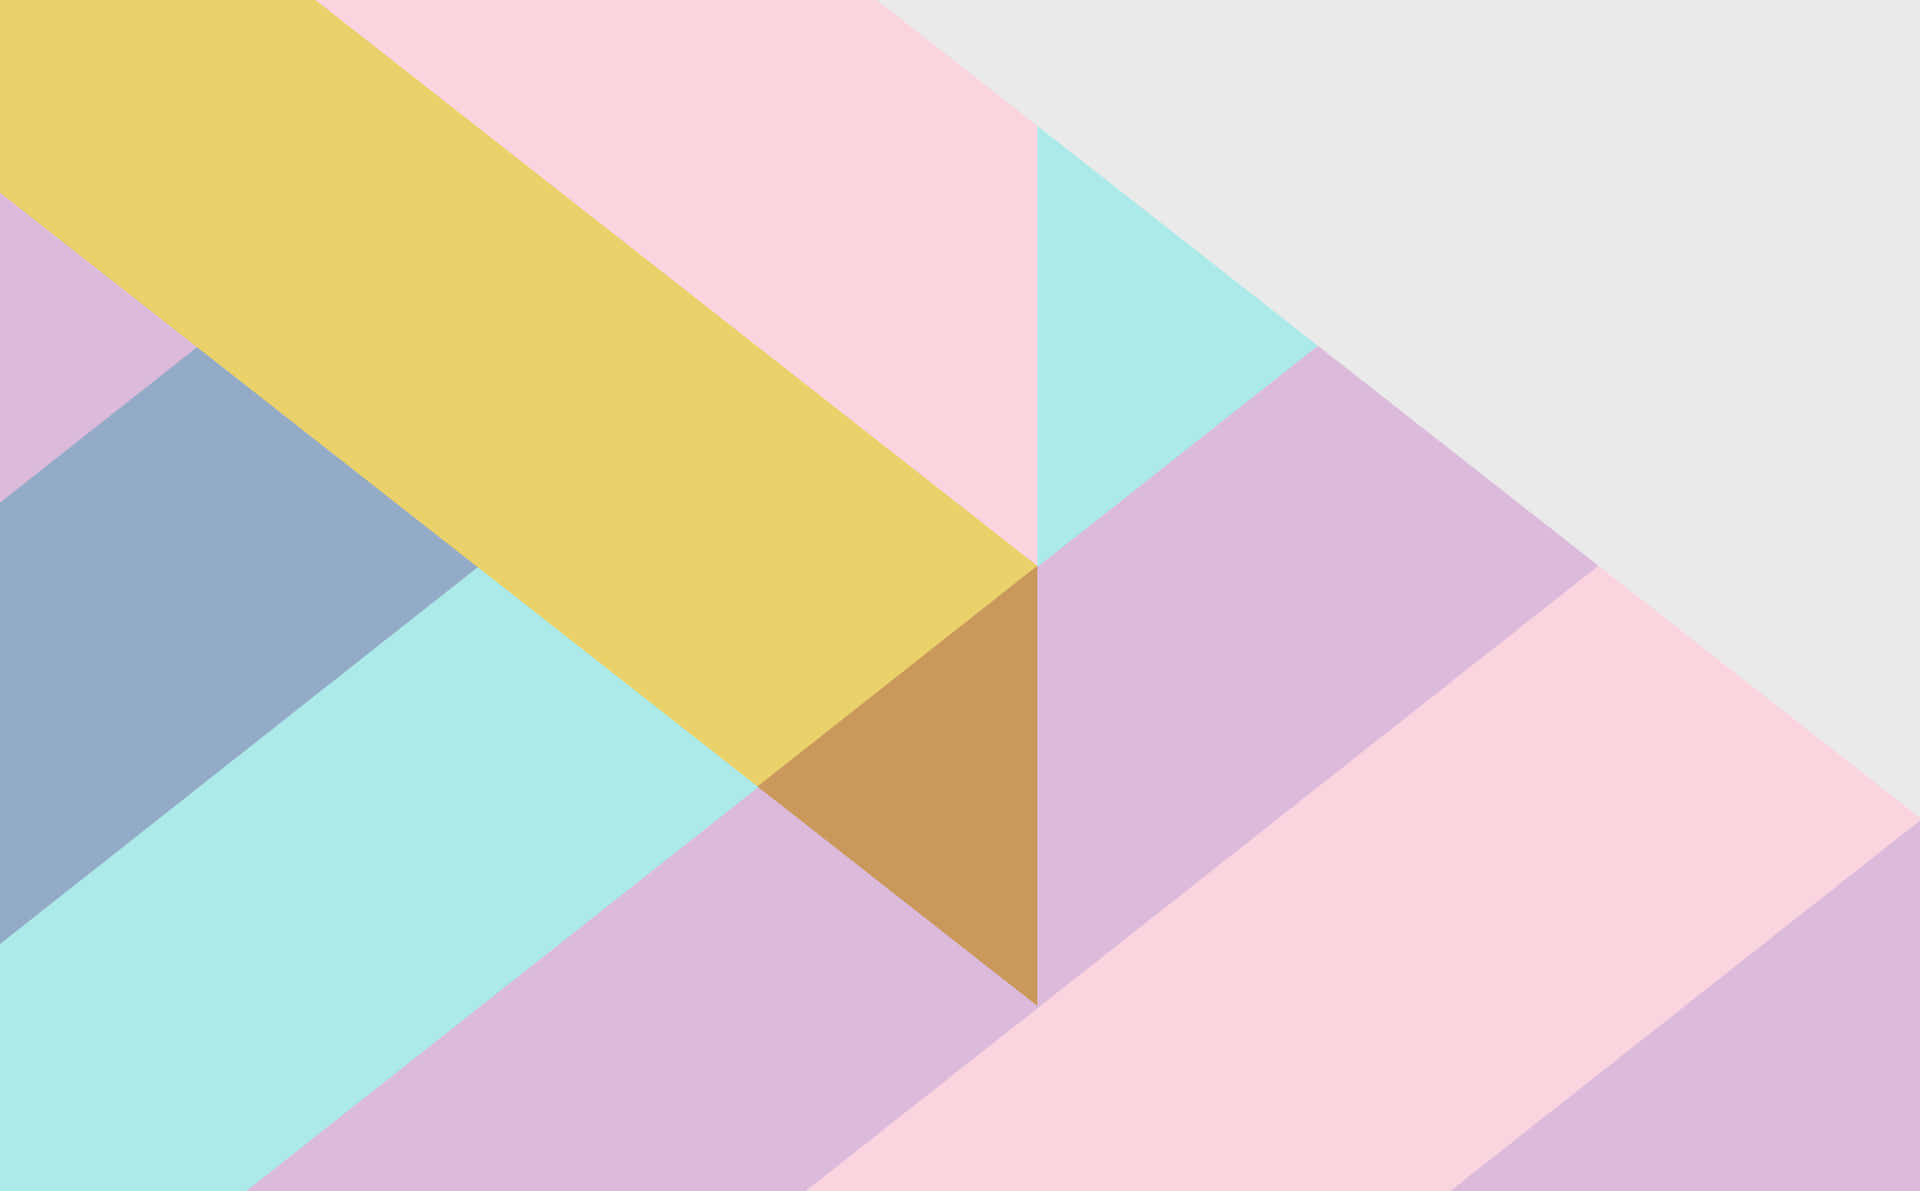 A Colorful Geometric Pattern With A Yellow, Blue, And Pink Color